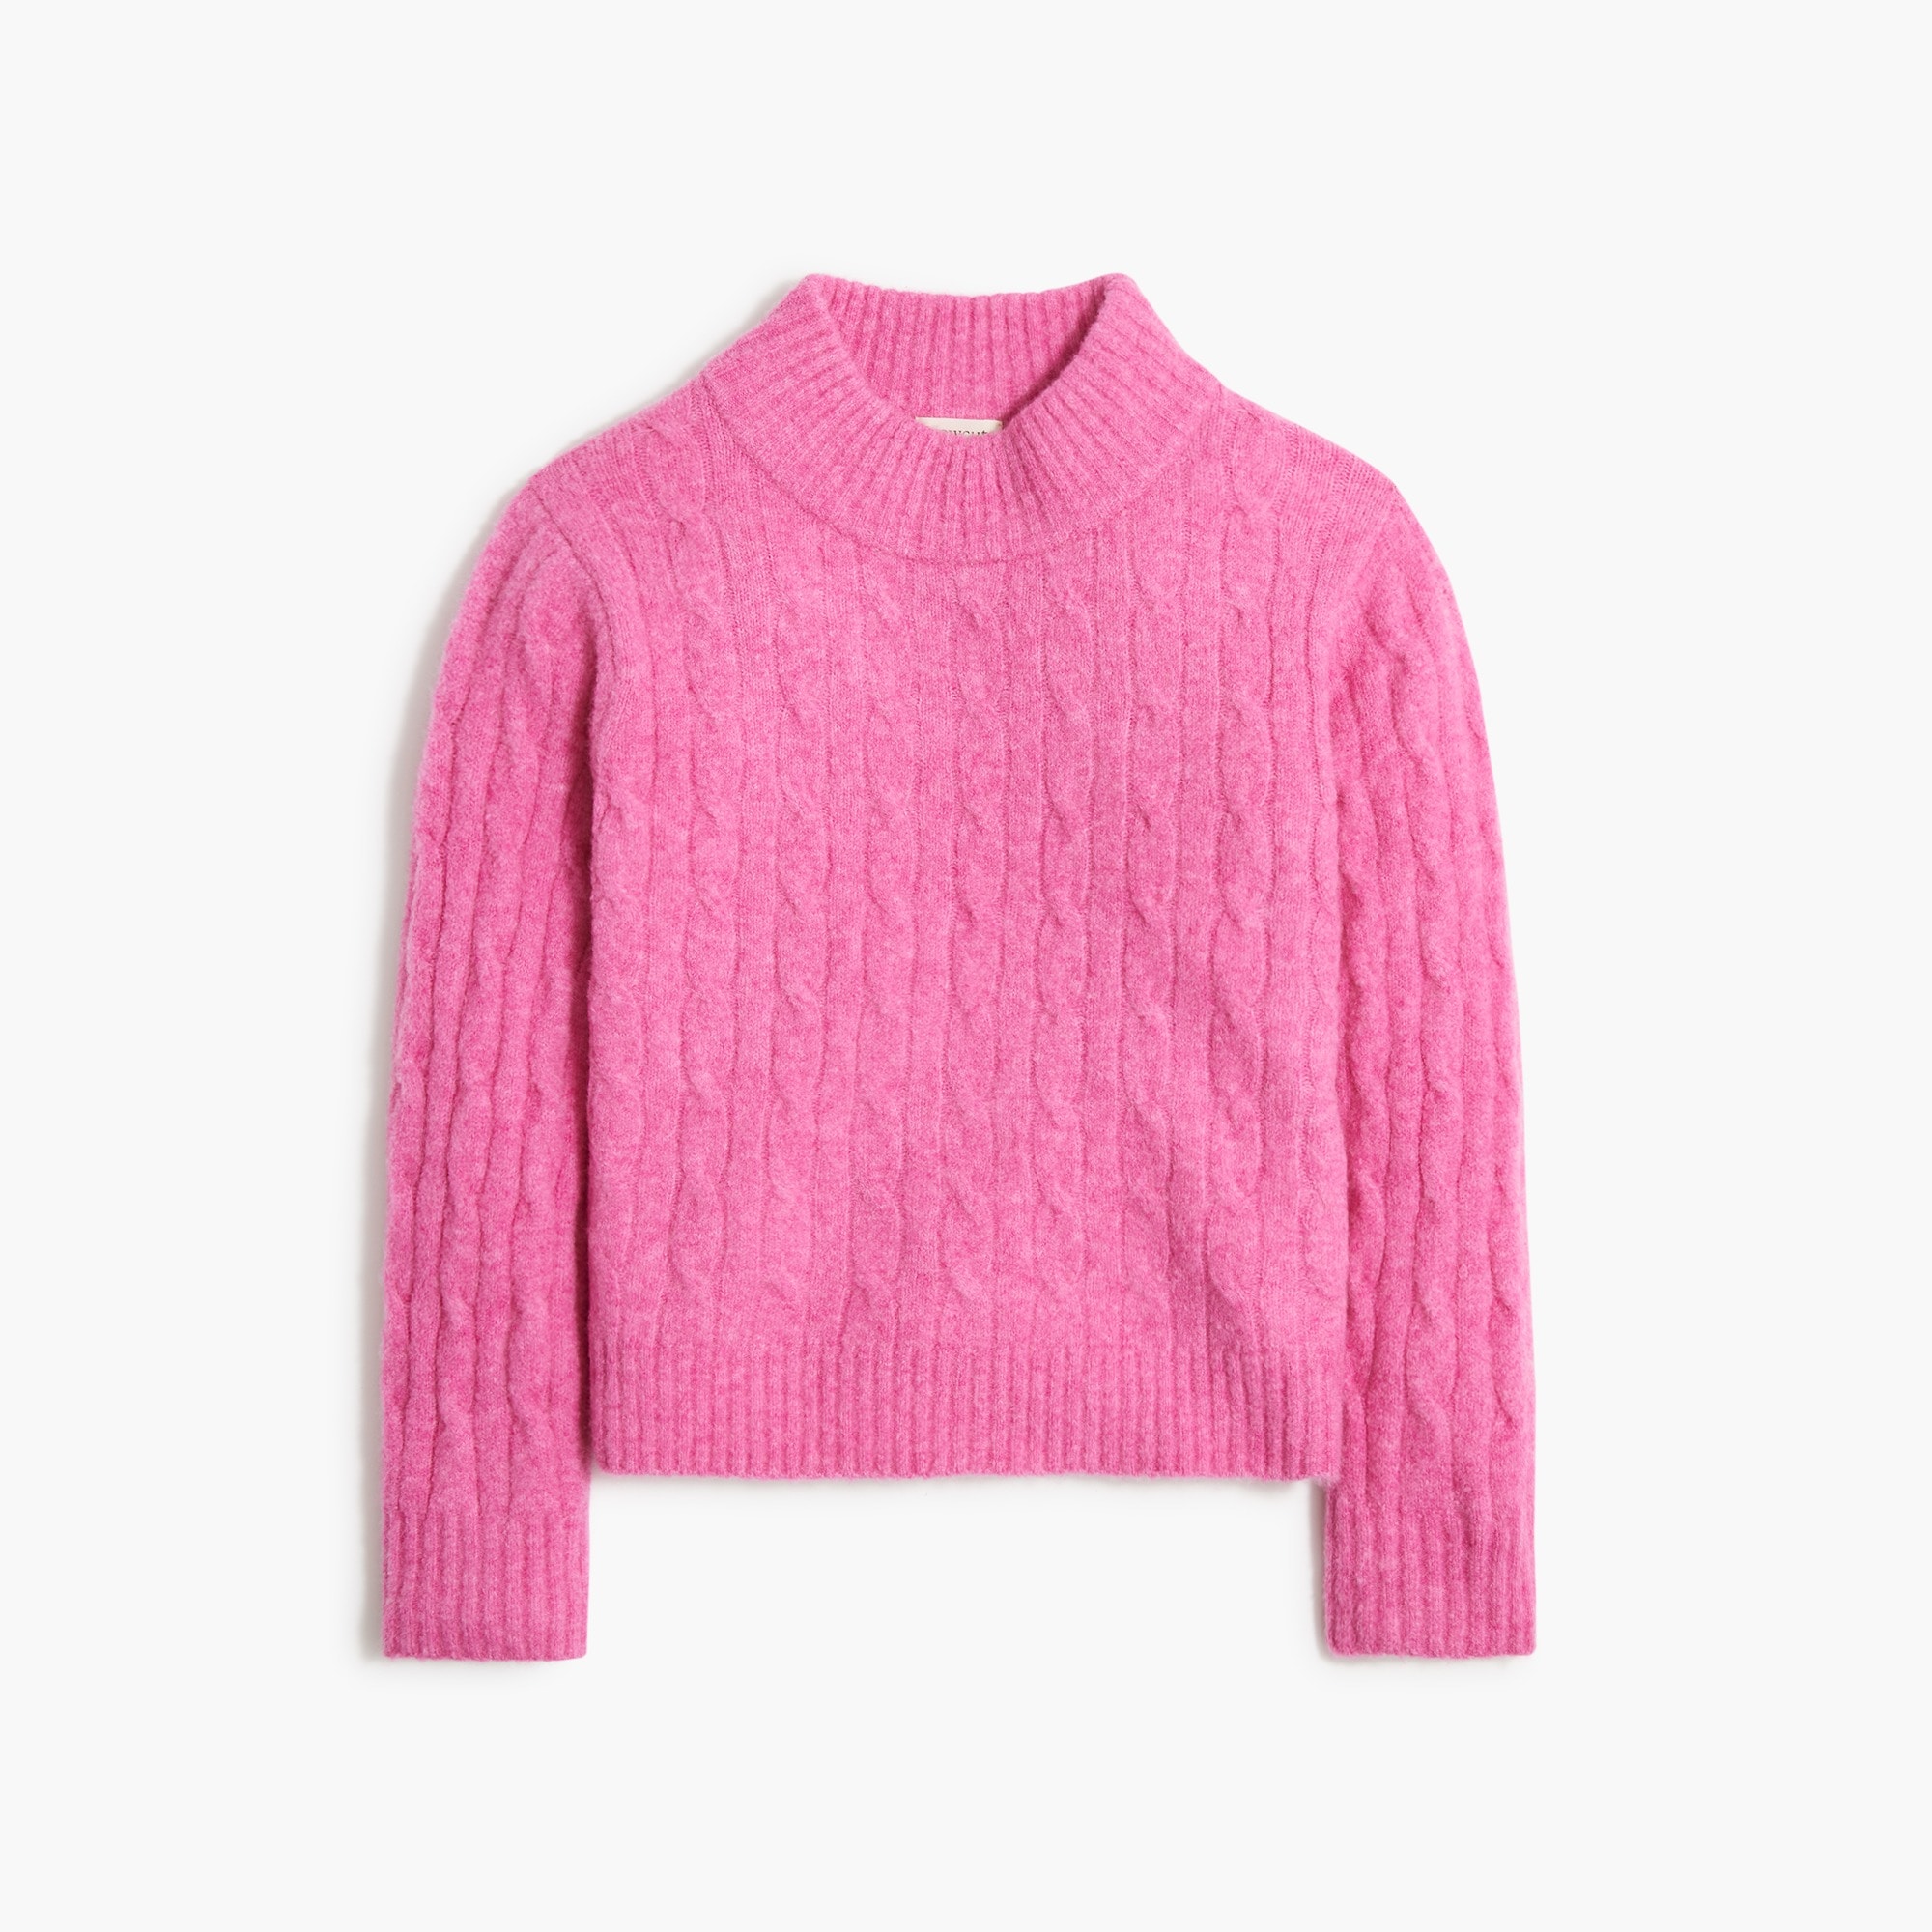 Girls' cable mockneck sweater extra-soft yarn